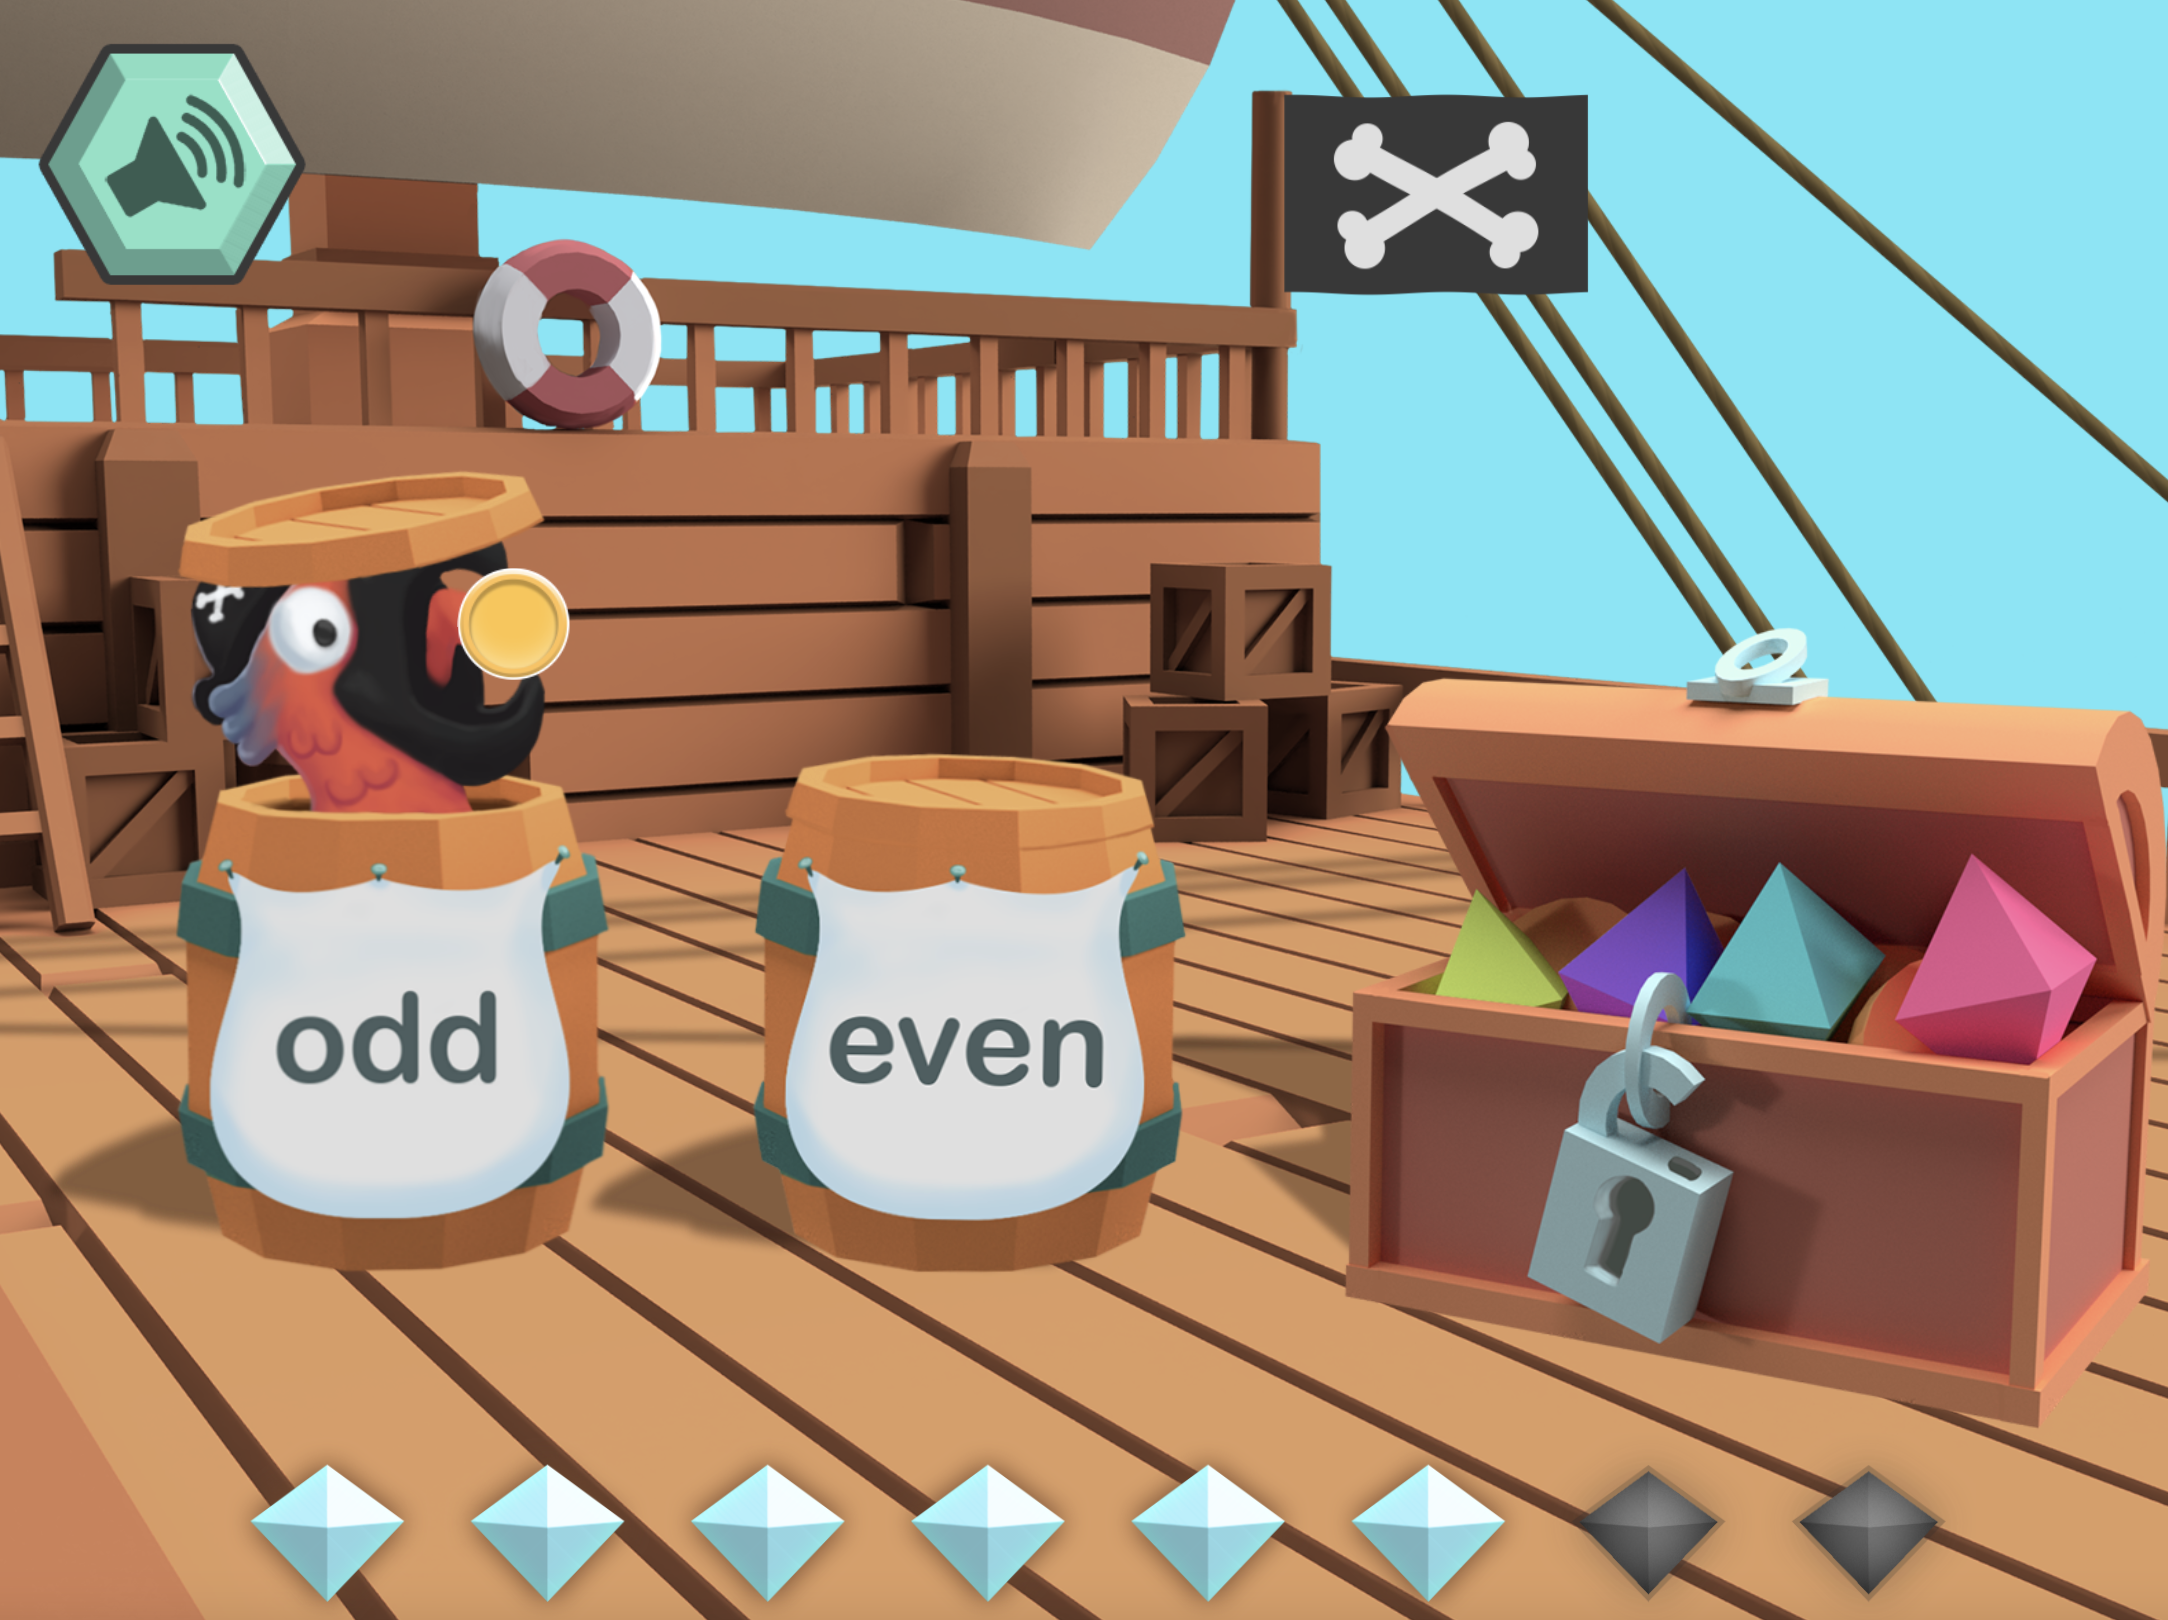 Each coin is received by a pirate parrot